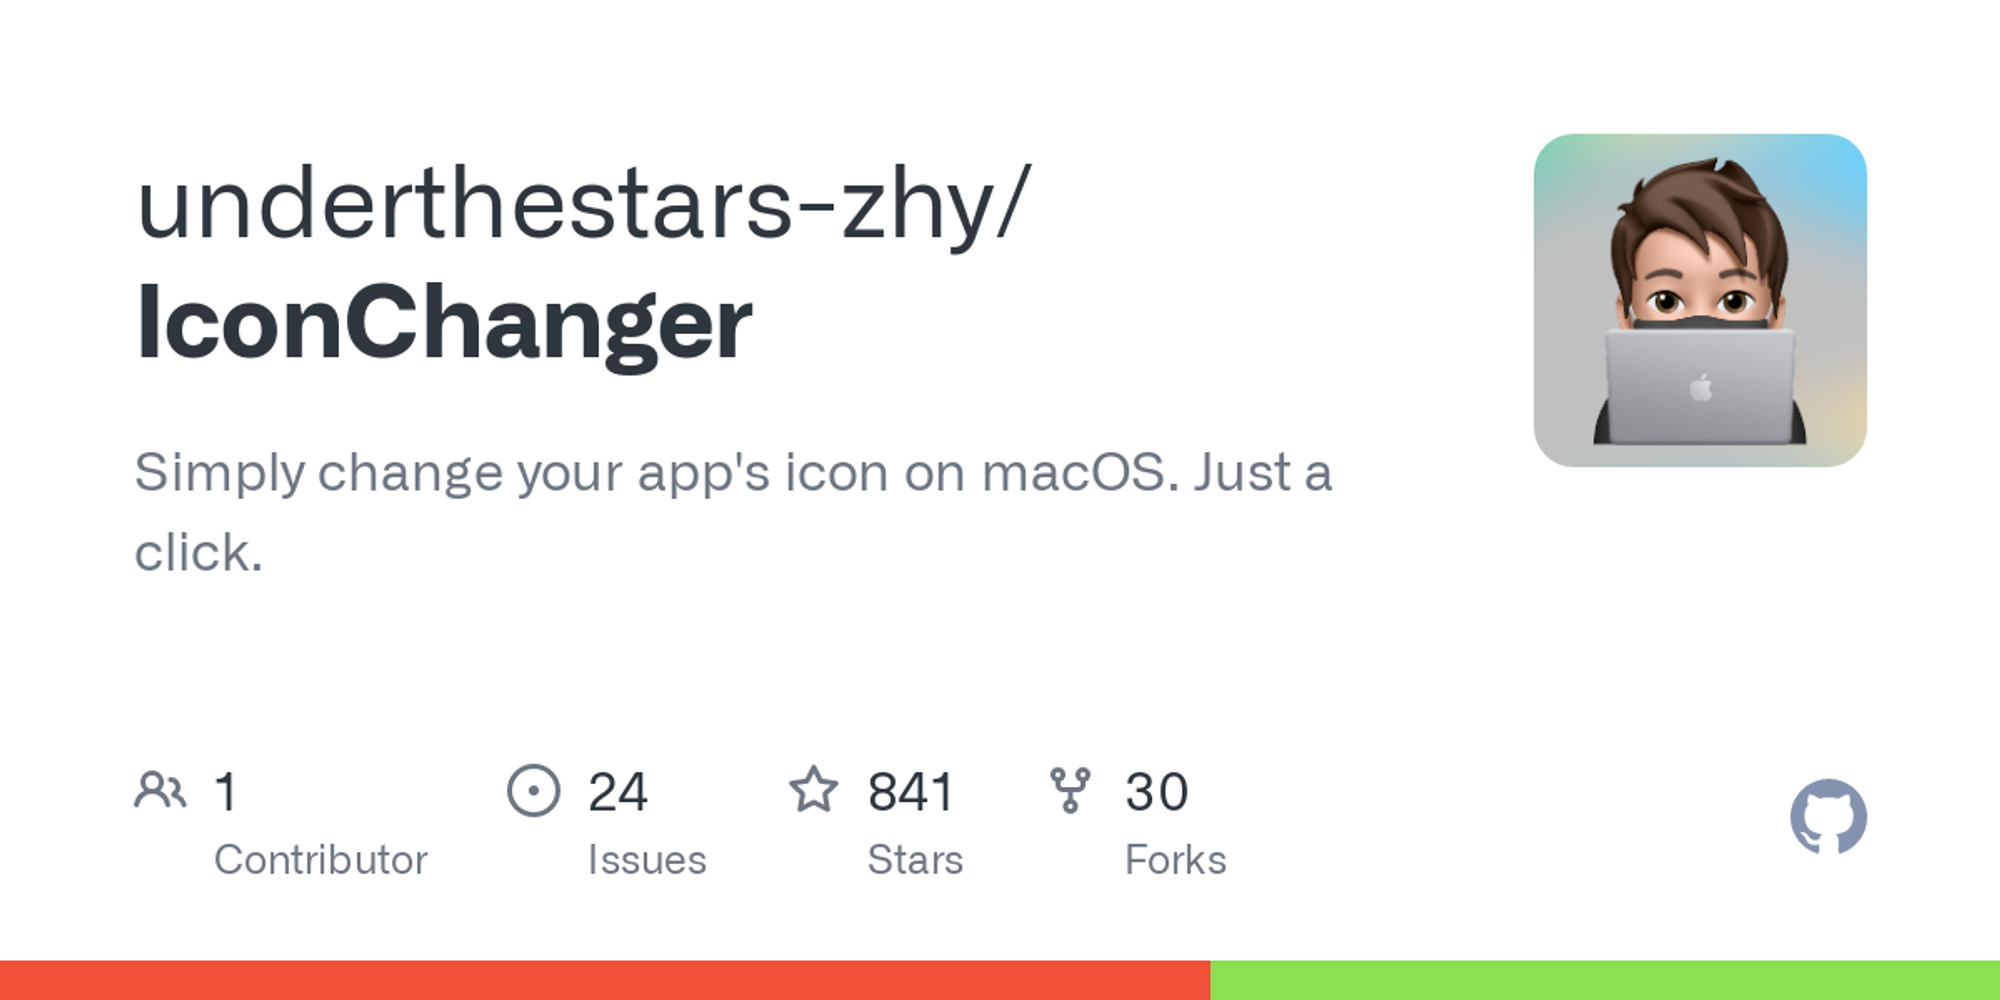 GitHub - underthestars-zhy/IconChanger: Simply change your app's icon on macOS. Just a click.